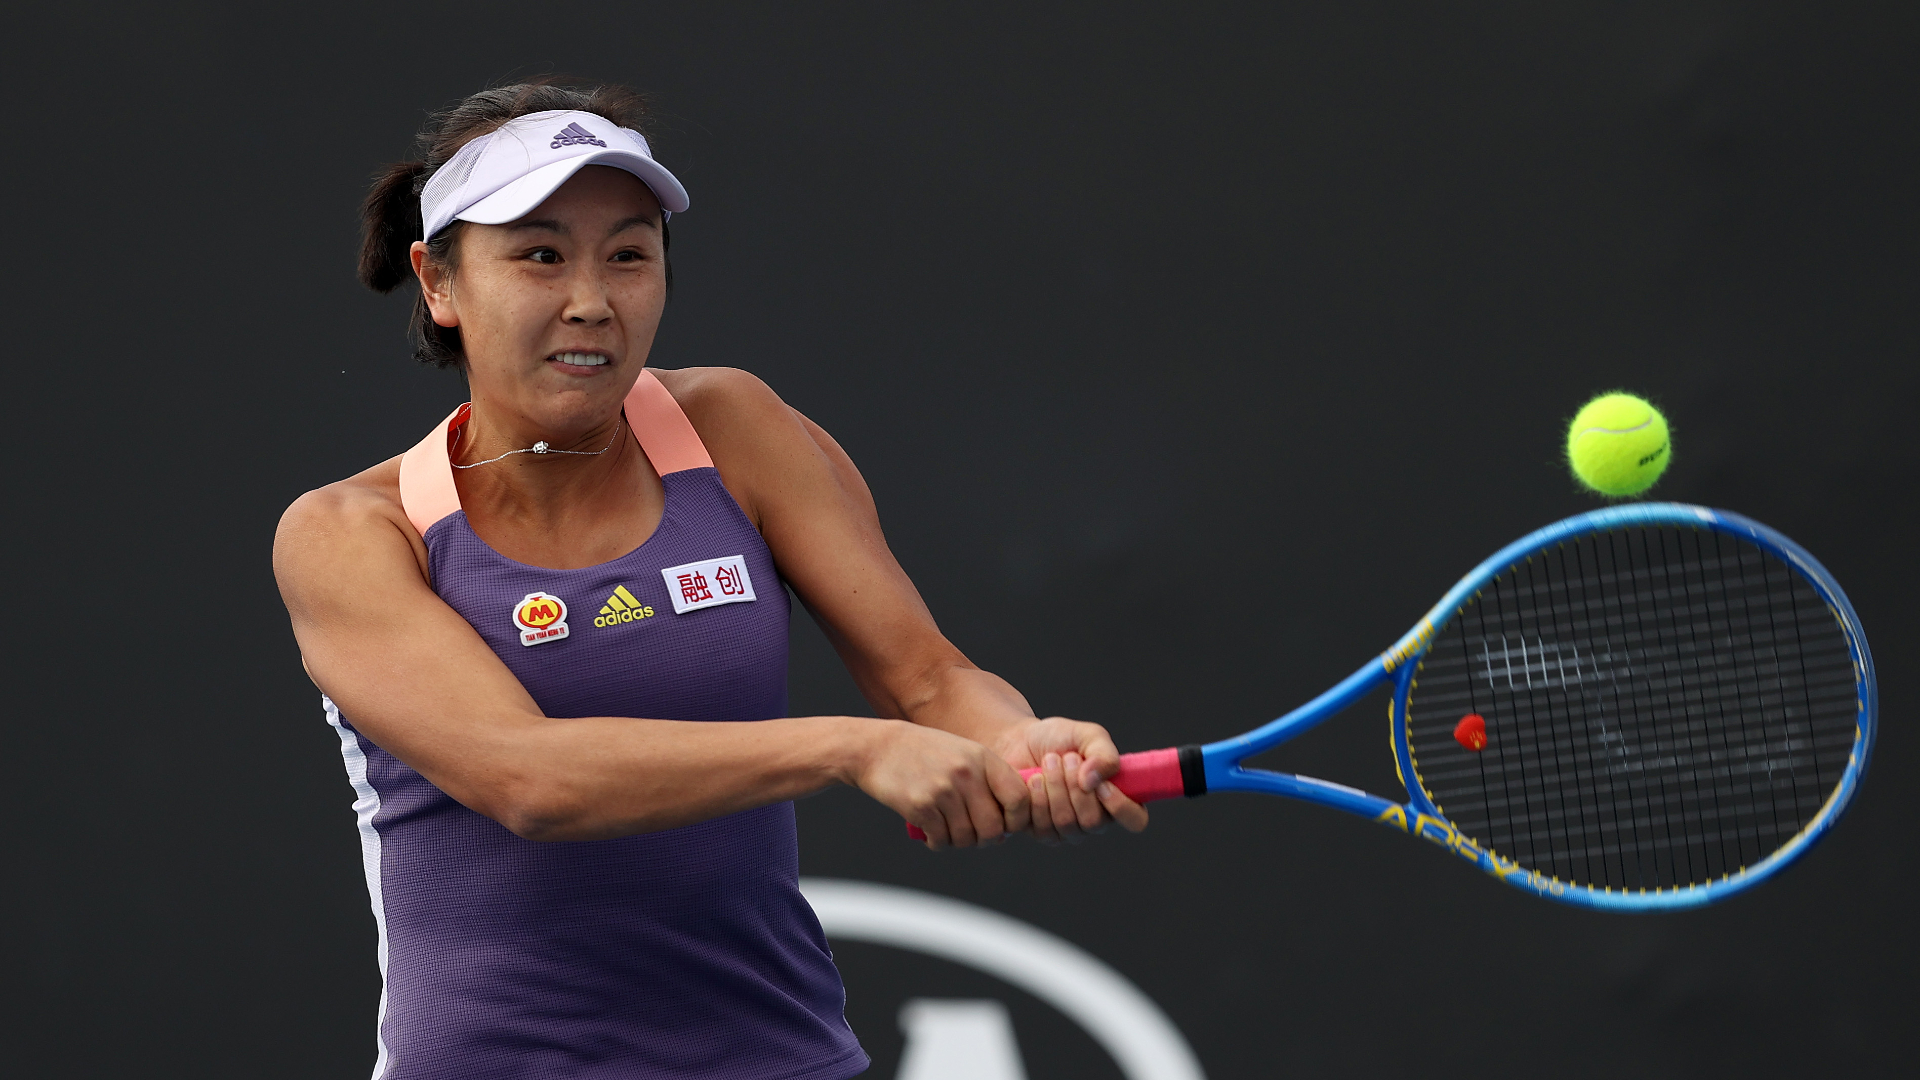 Peng Shuai says shes safe and well in video beIN SPORTS